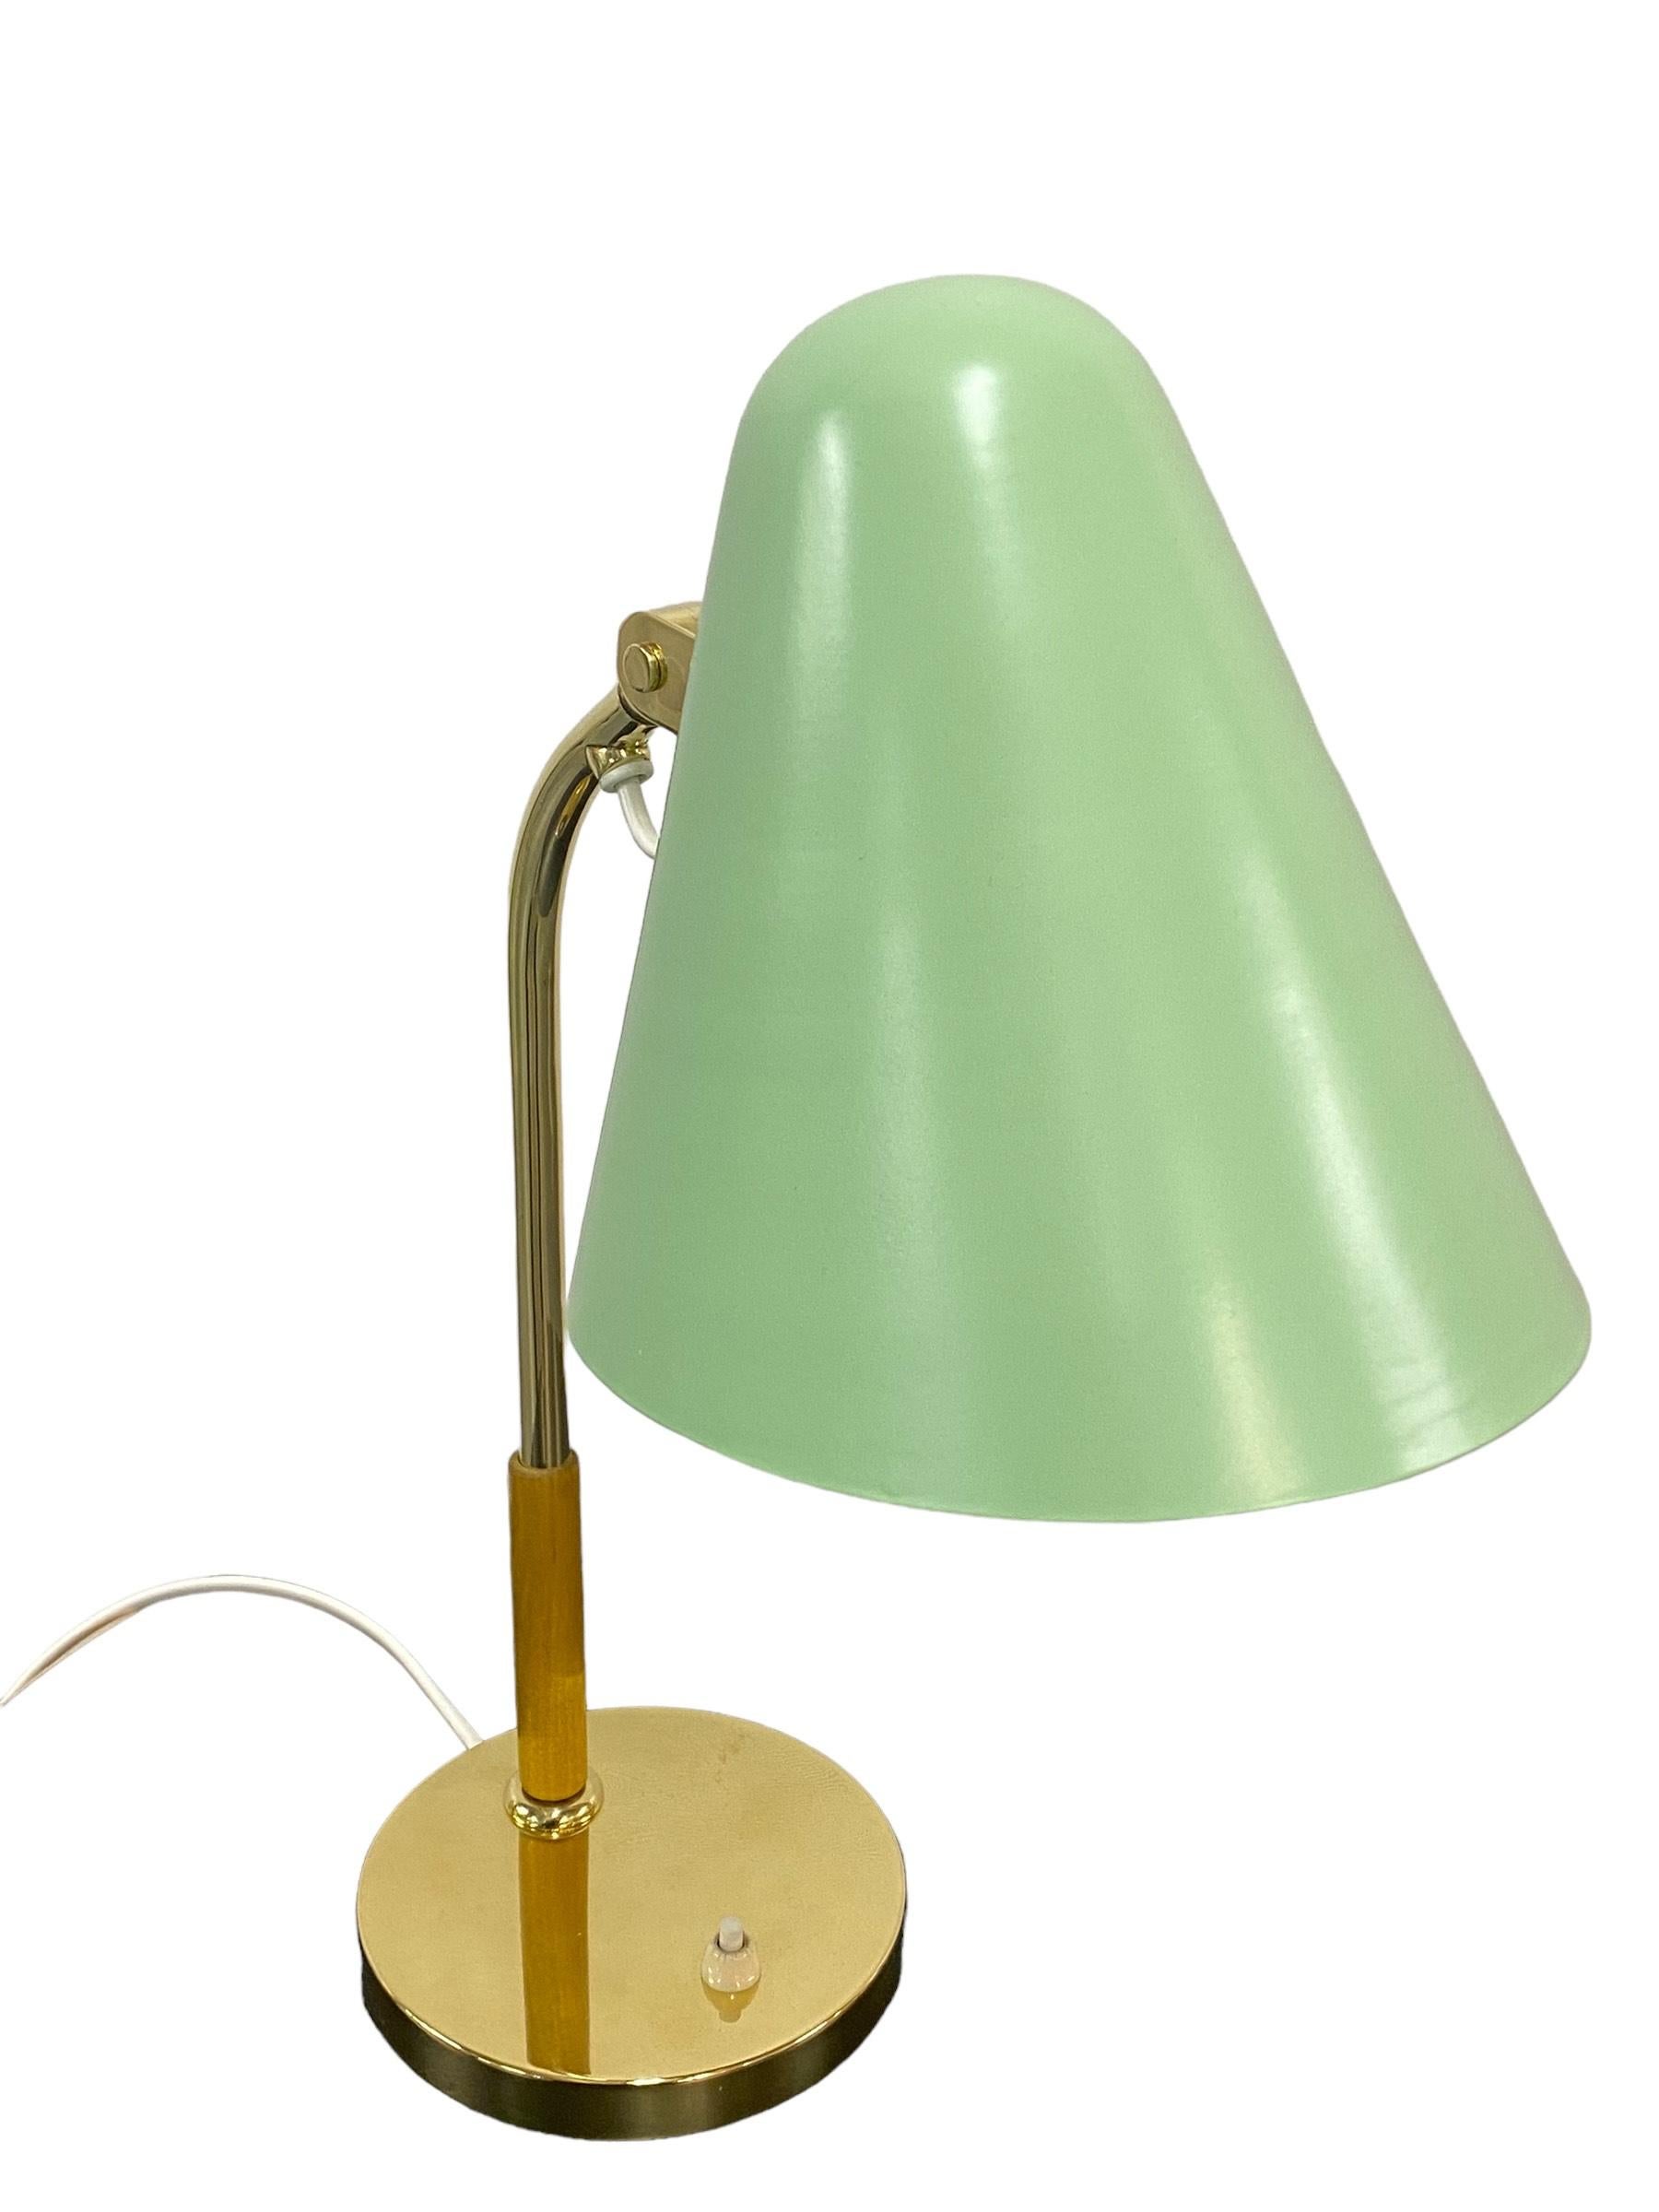 Scandinavian Modern Paavo Tynell Table lamp Model. 5233, Taito Oy 1950s For Sale